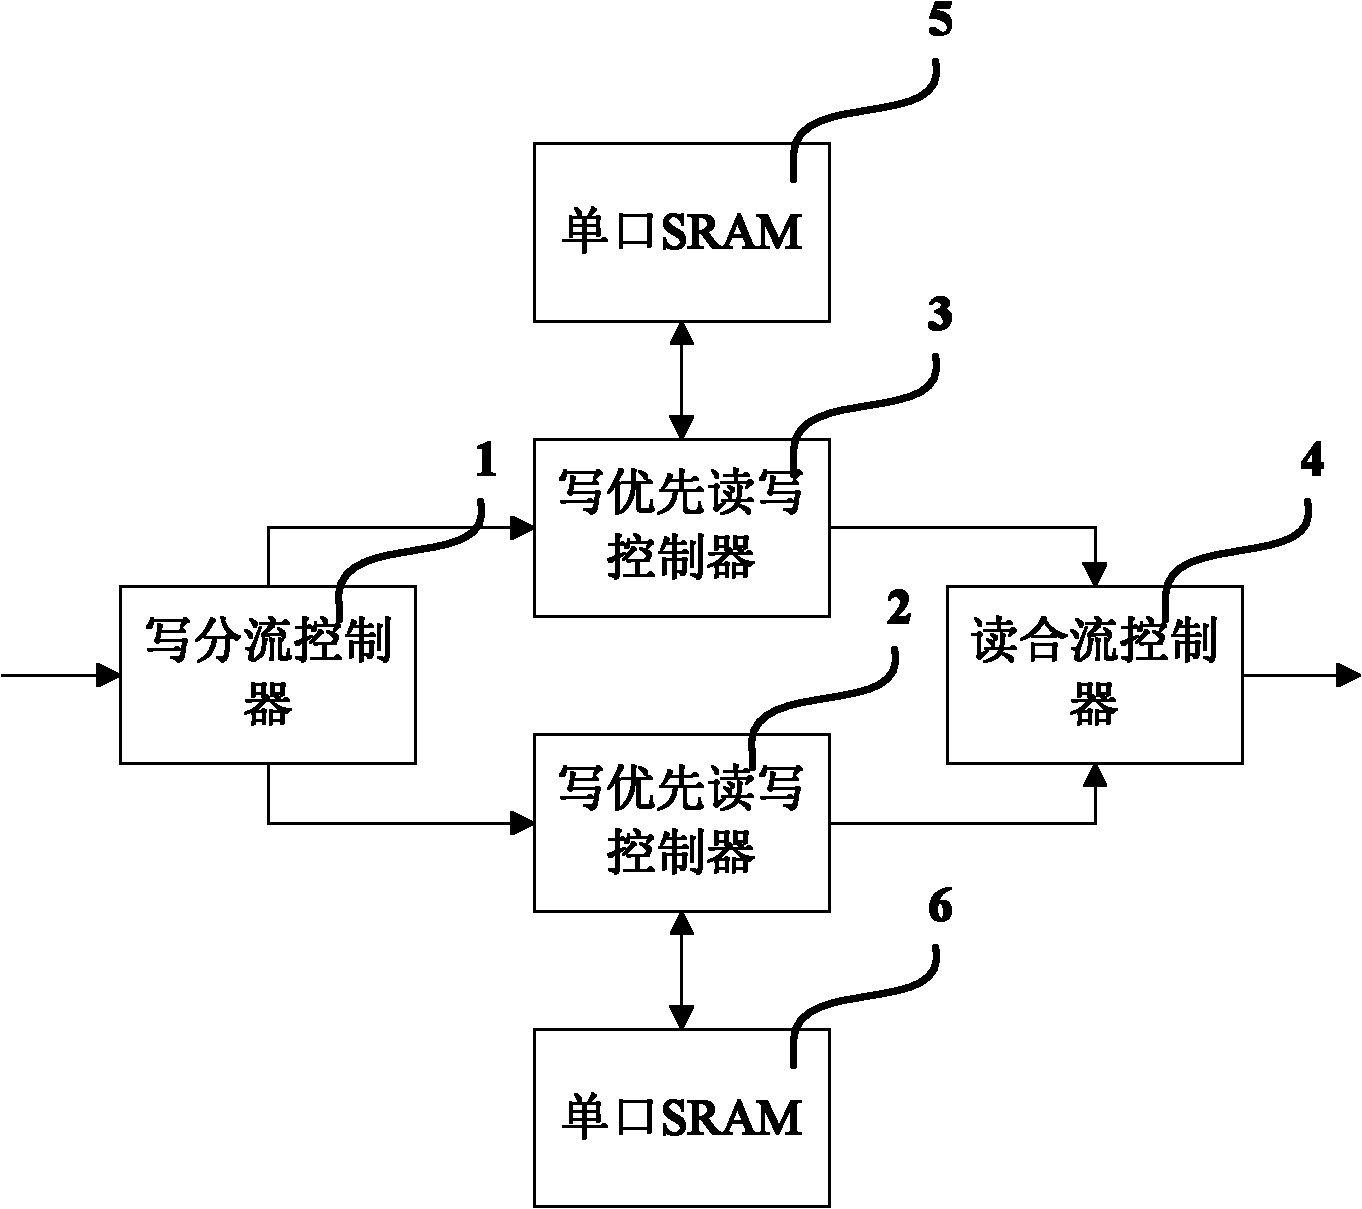 FIFO memory and storage controlling device